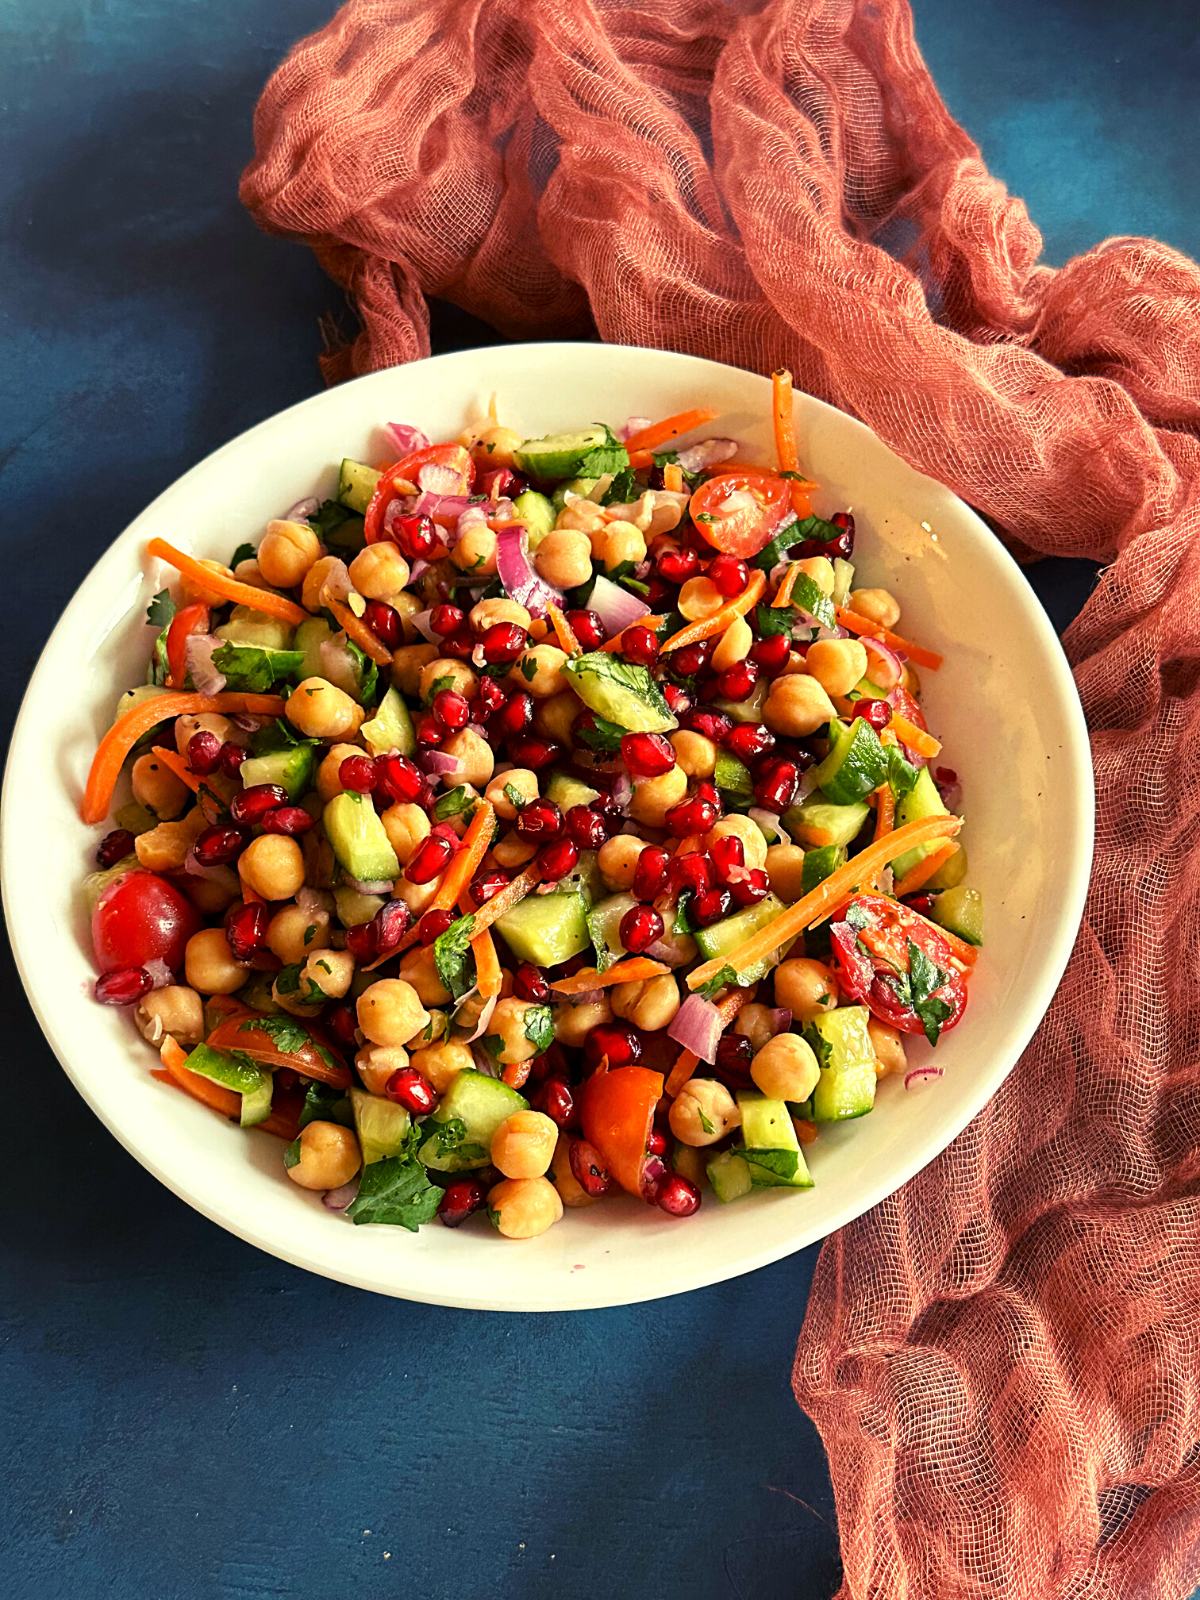 high protein vegetarian salad with chickpeas, veggies and fruits in a bowl